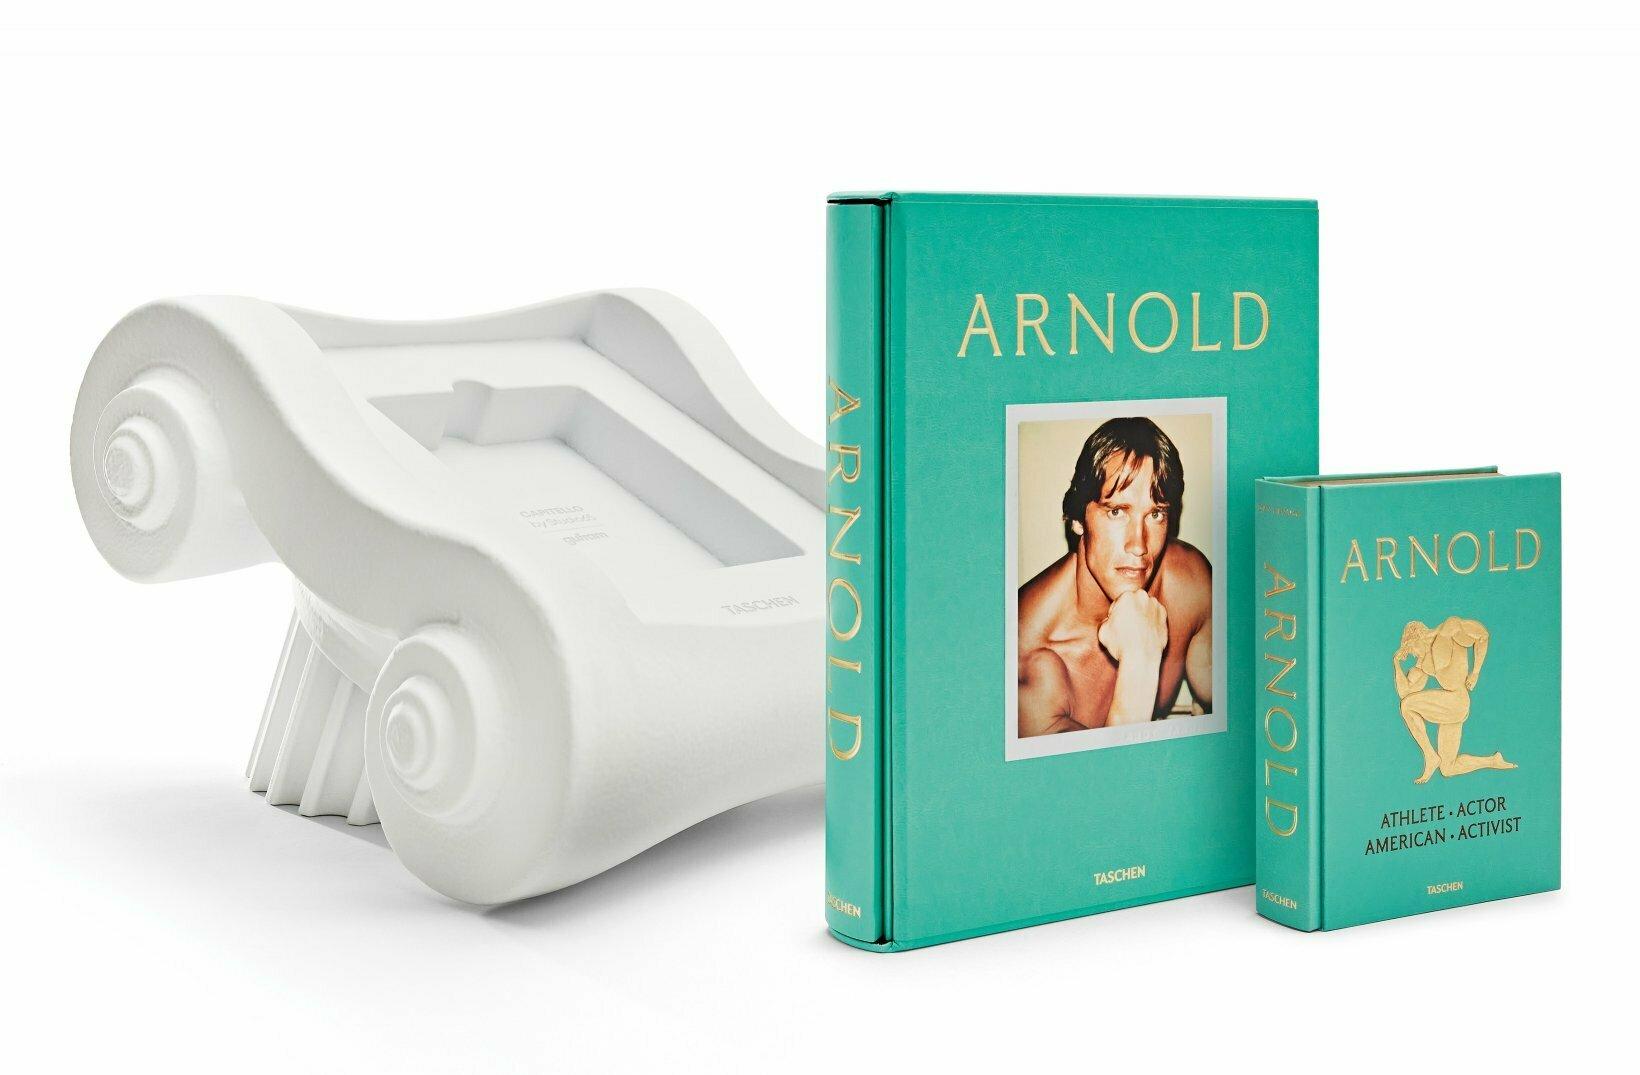 Italian Arnold Schwarzenegger, Signed Limited Edition Book with Capitello Bookstand For Sale